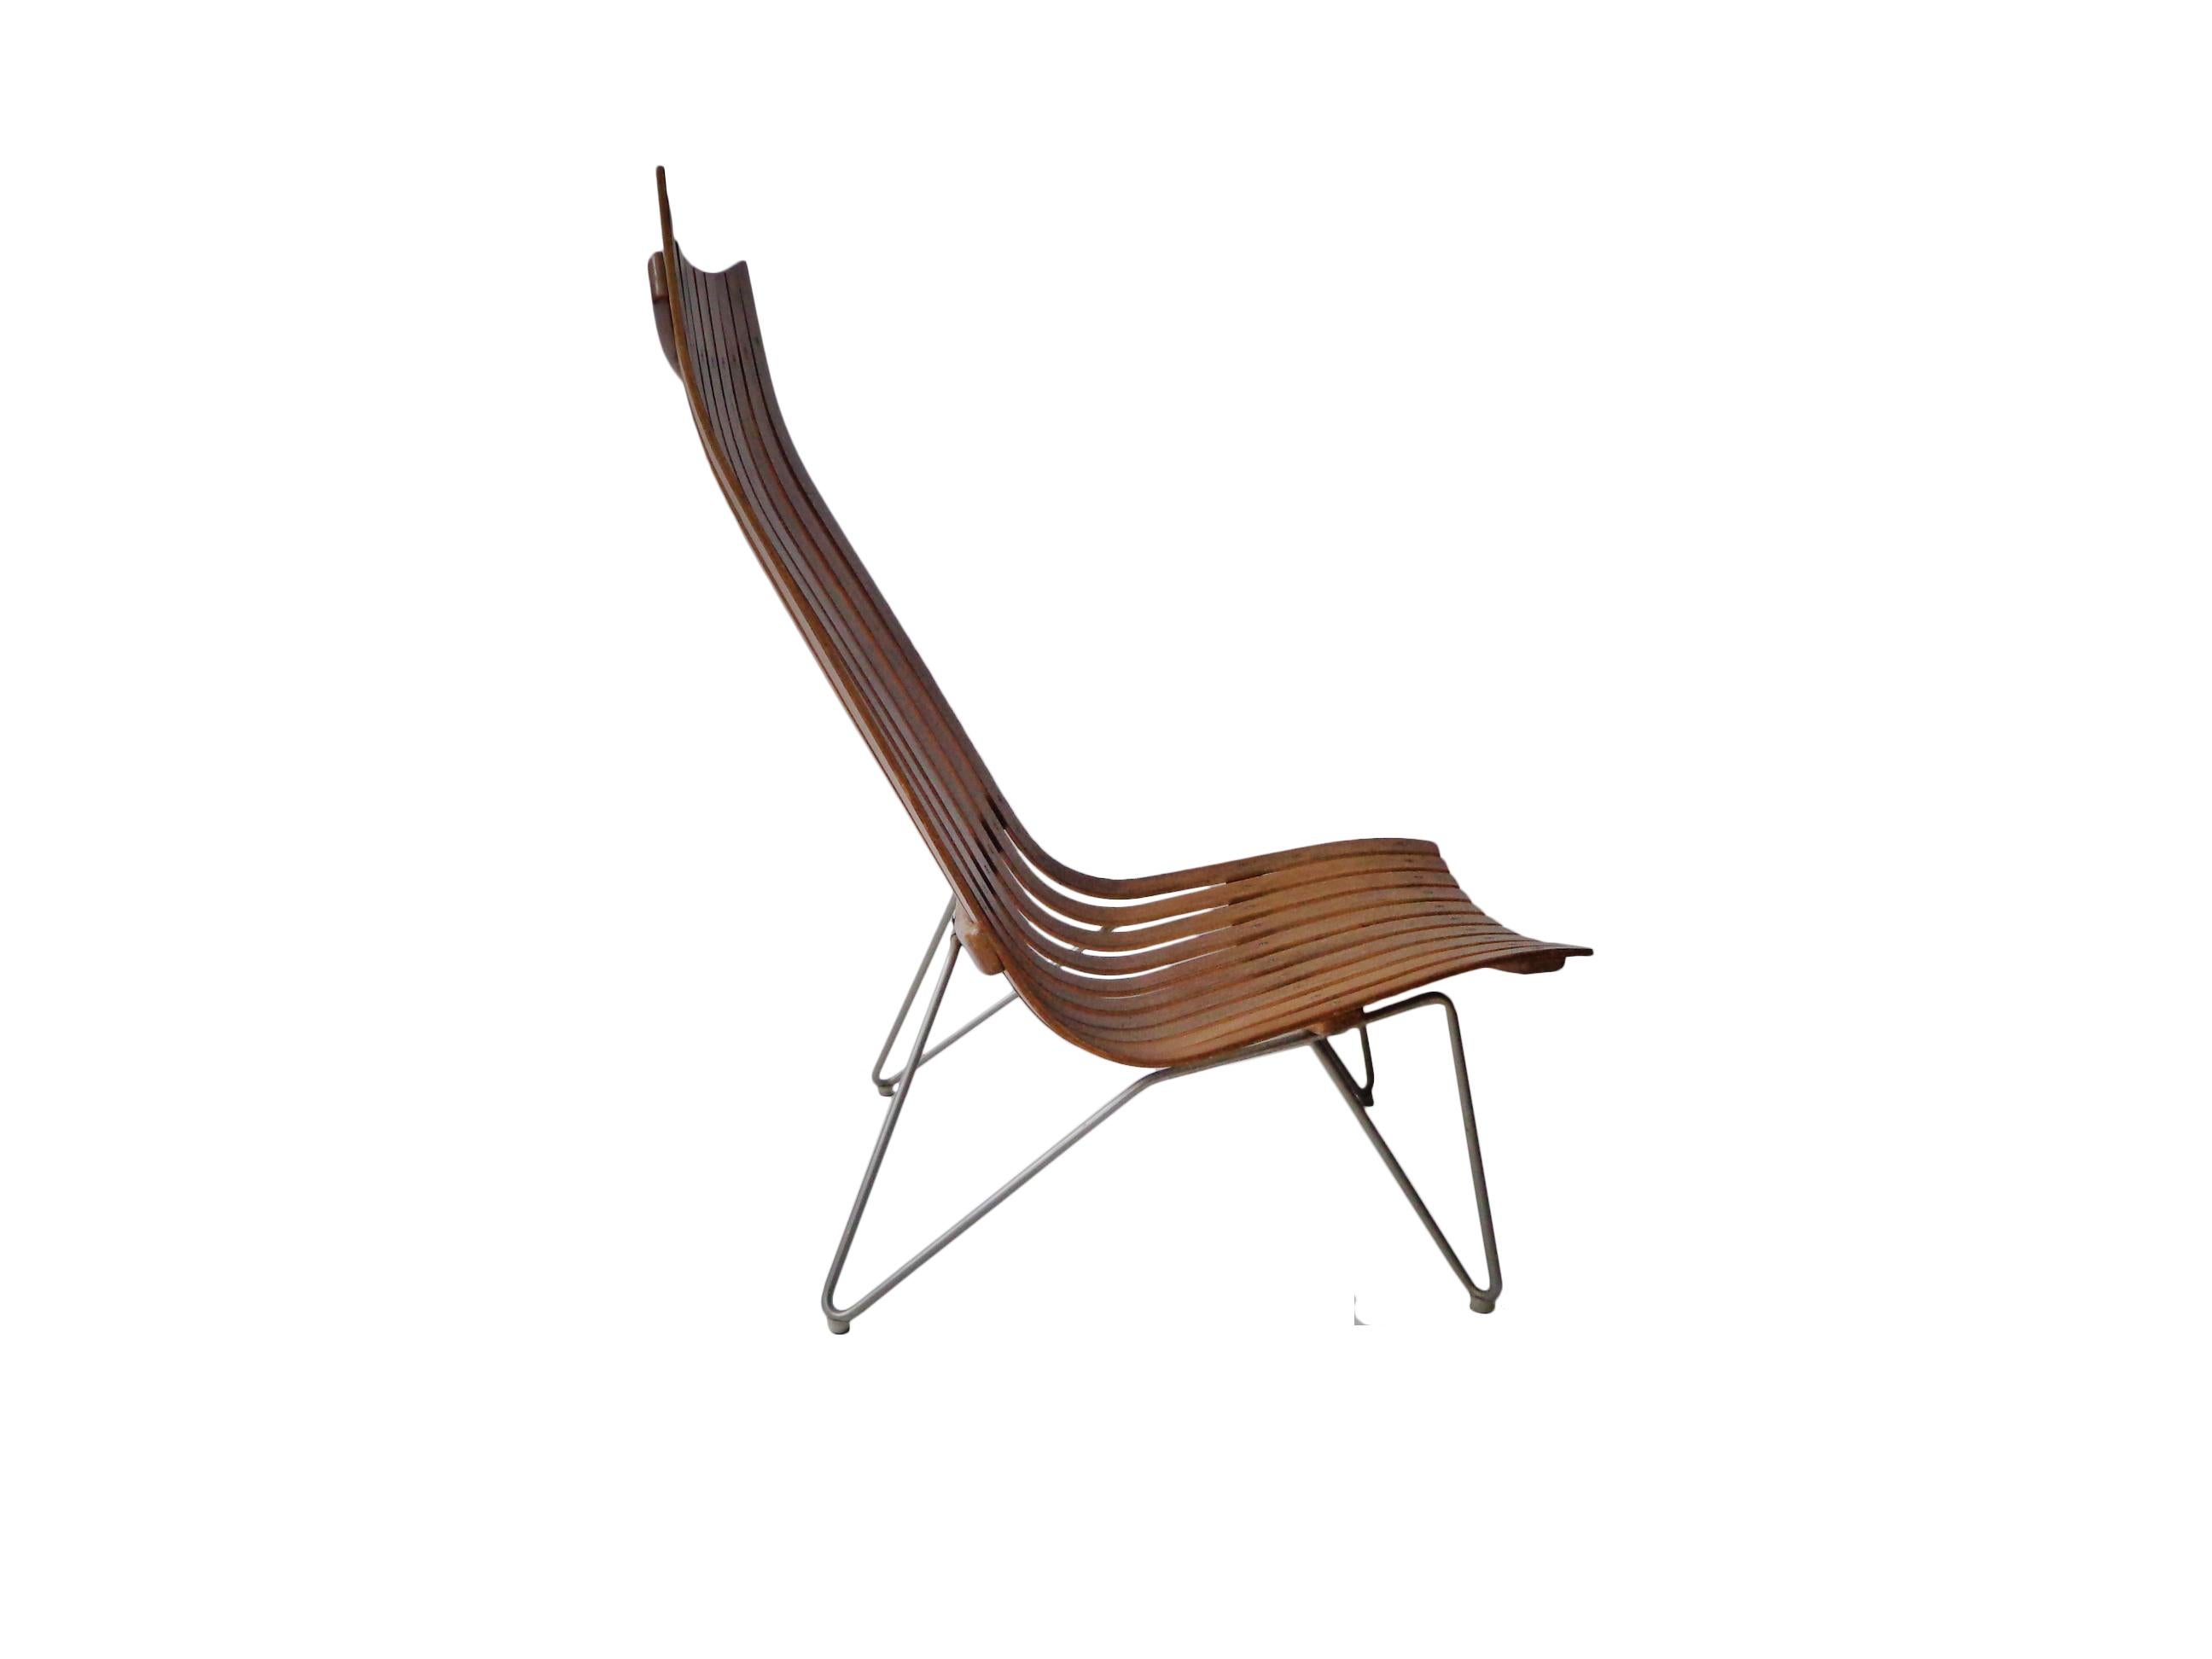 Mid-20th Century Hans Brattrud ‘Scandia’ Lounge Chair by Hove Møbler, Scandinavian design 1957 For Sale